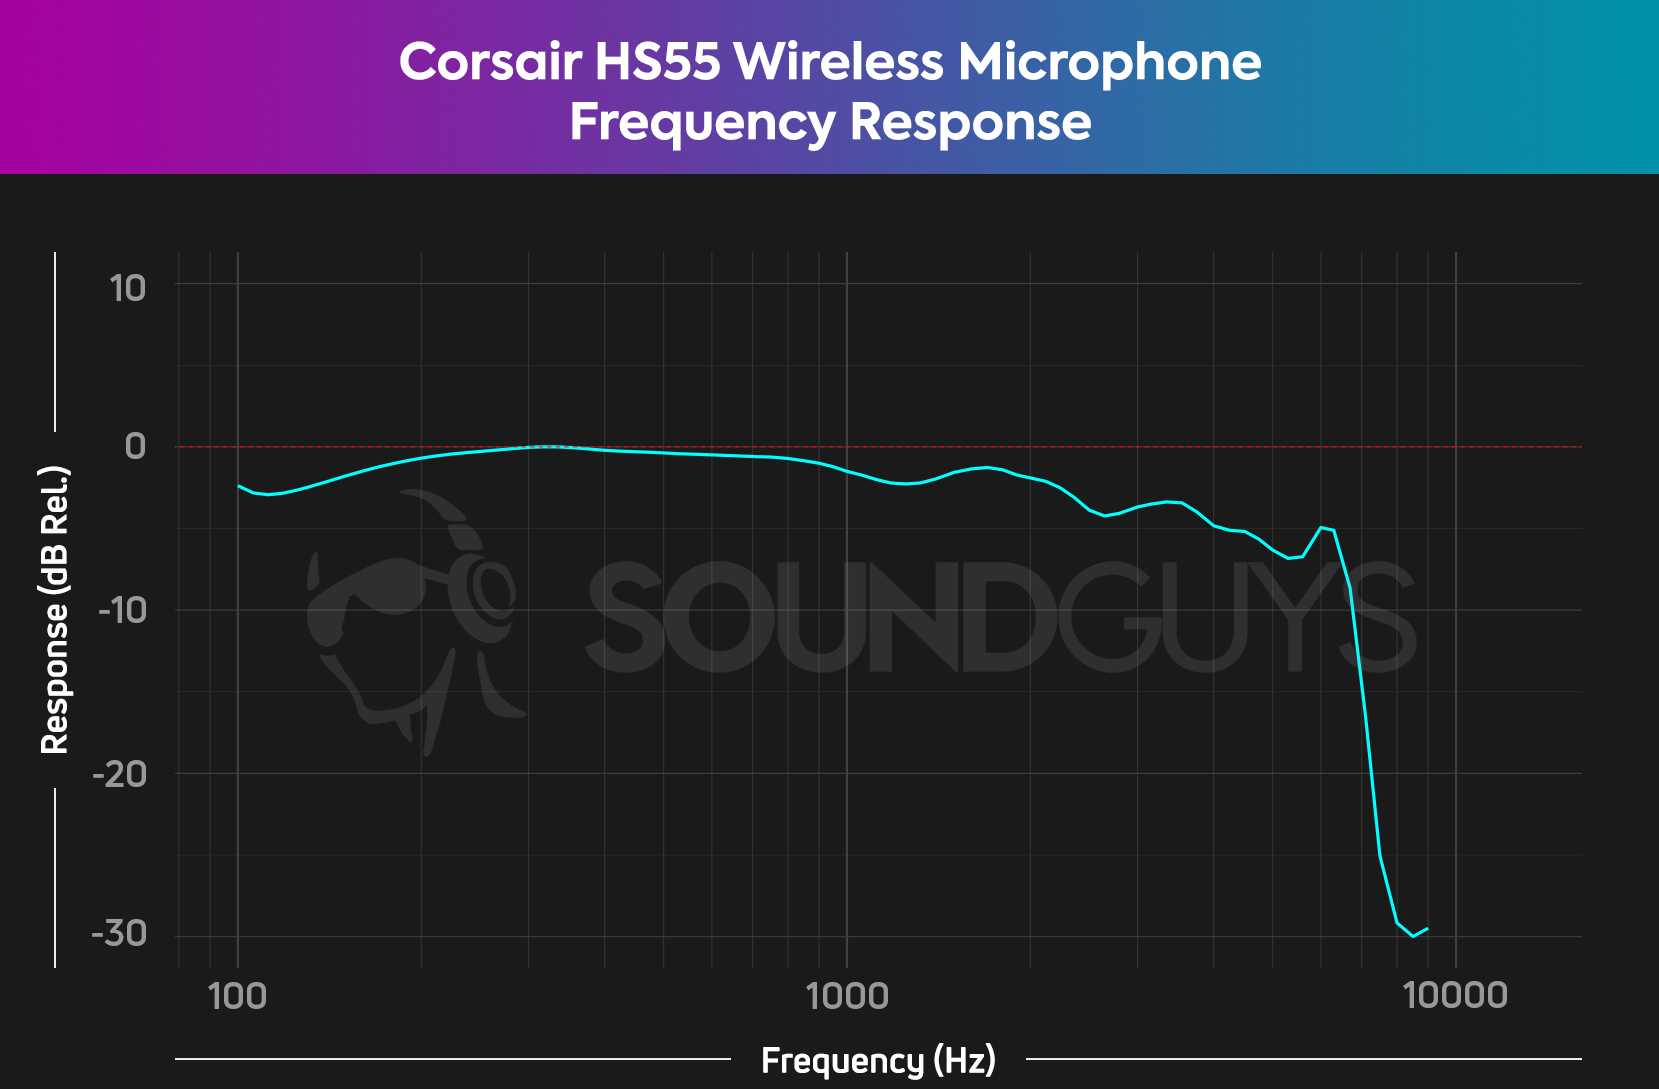 The Corsair HS55 Wireless microphone frequency response profile showing a fairly flat profile and a sharp drop in the high end.